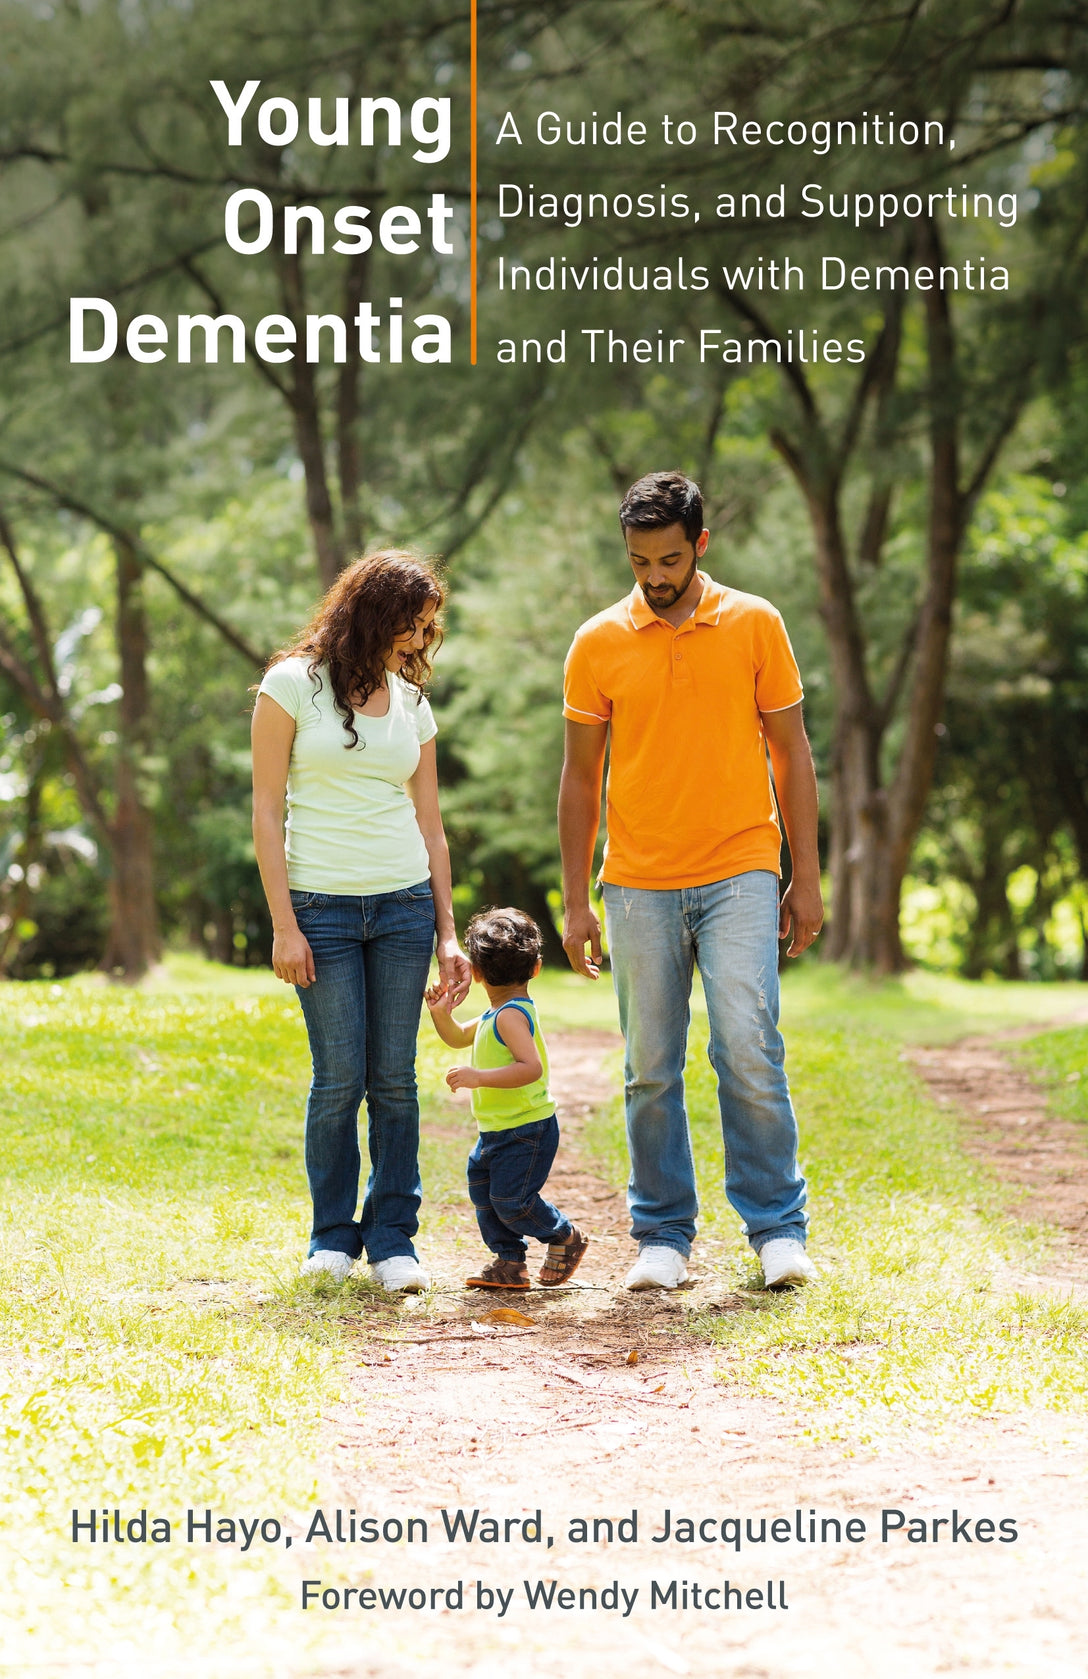 Young Onset Dementia by Hilda Hayo, Alison Ward, Jacqueline Parkes, Wendy Mitchell